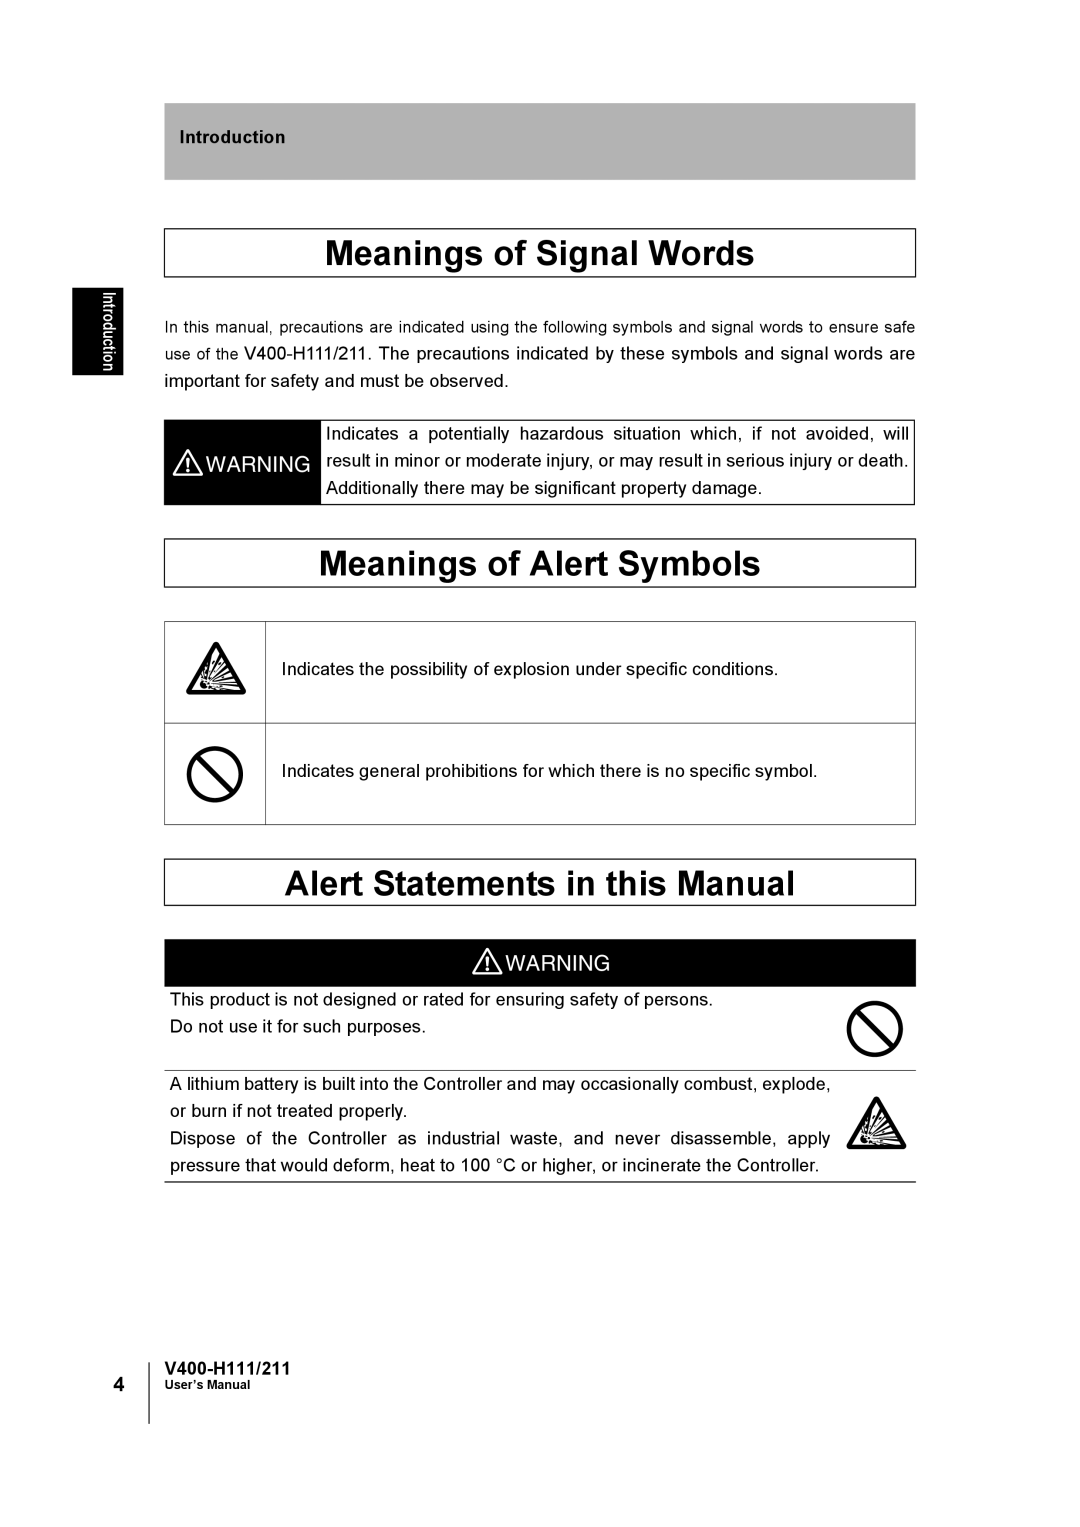 Omron V400-H111 user manual Meanings of Signal Words, Meanings of Alert Symbols, Alert Statements in this Manual 